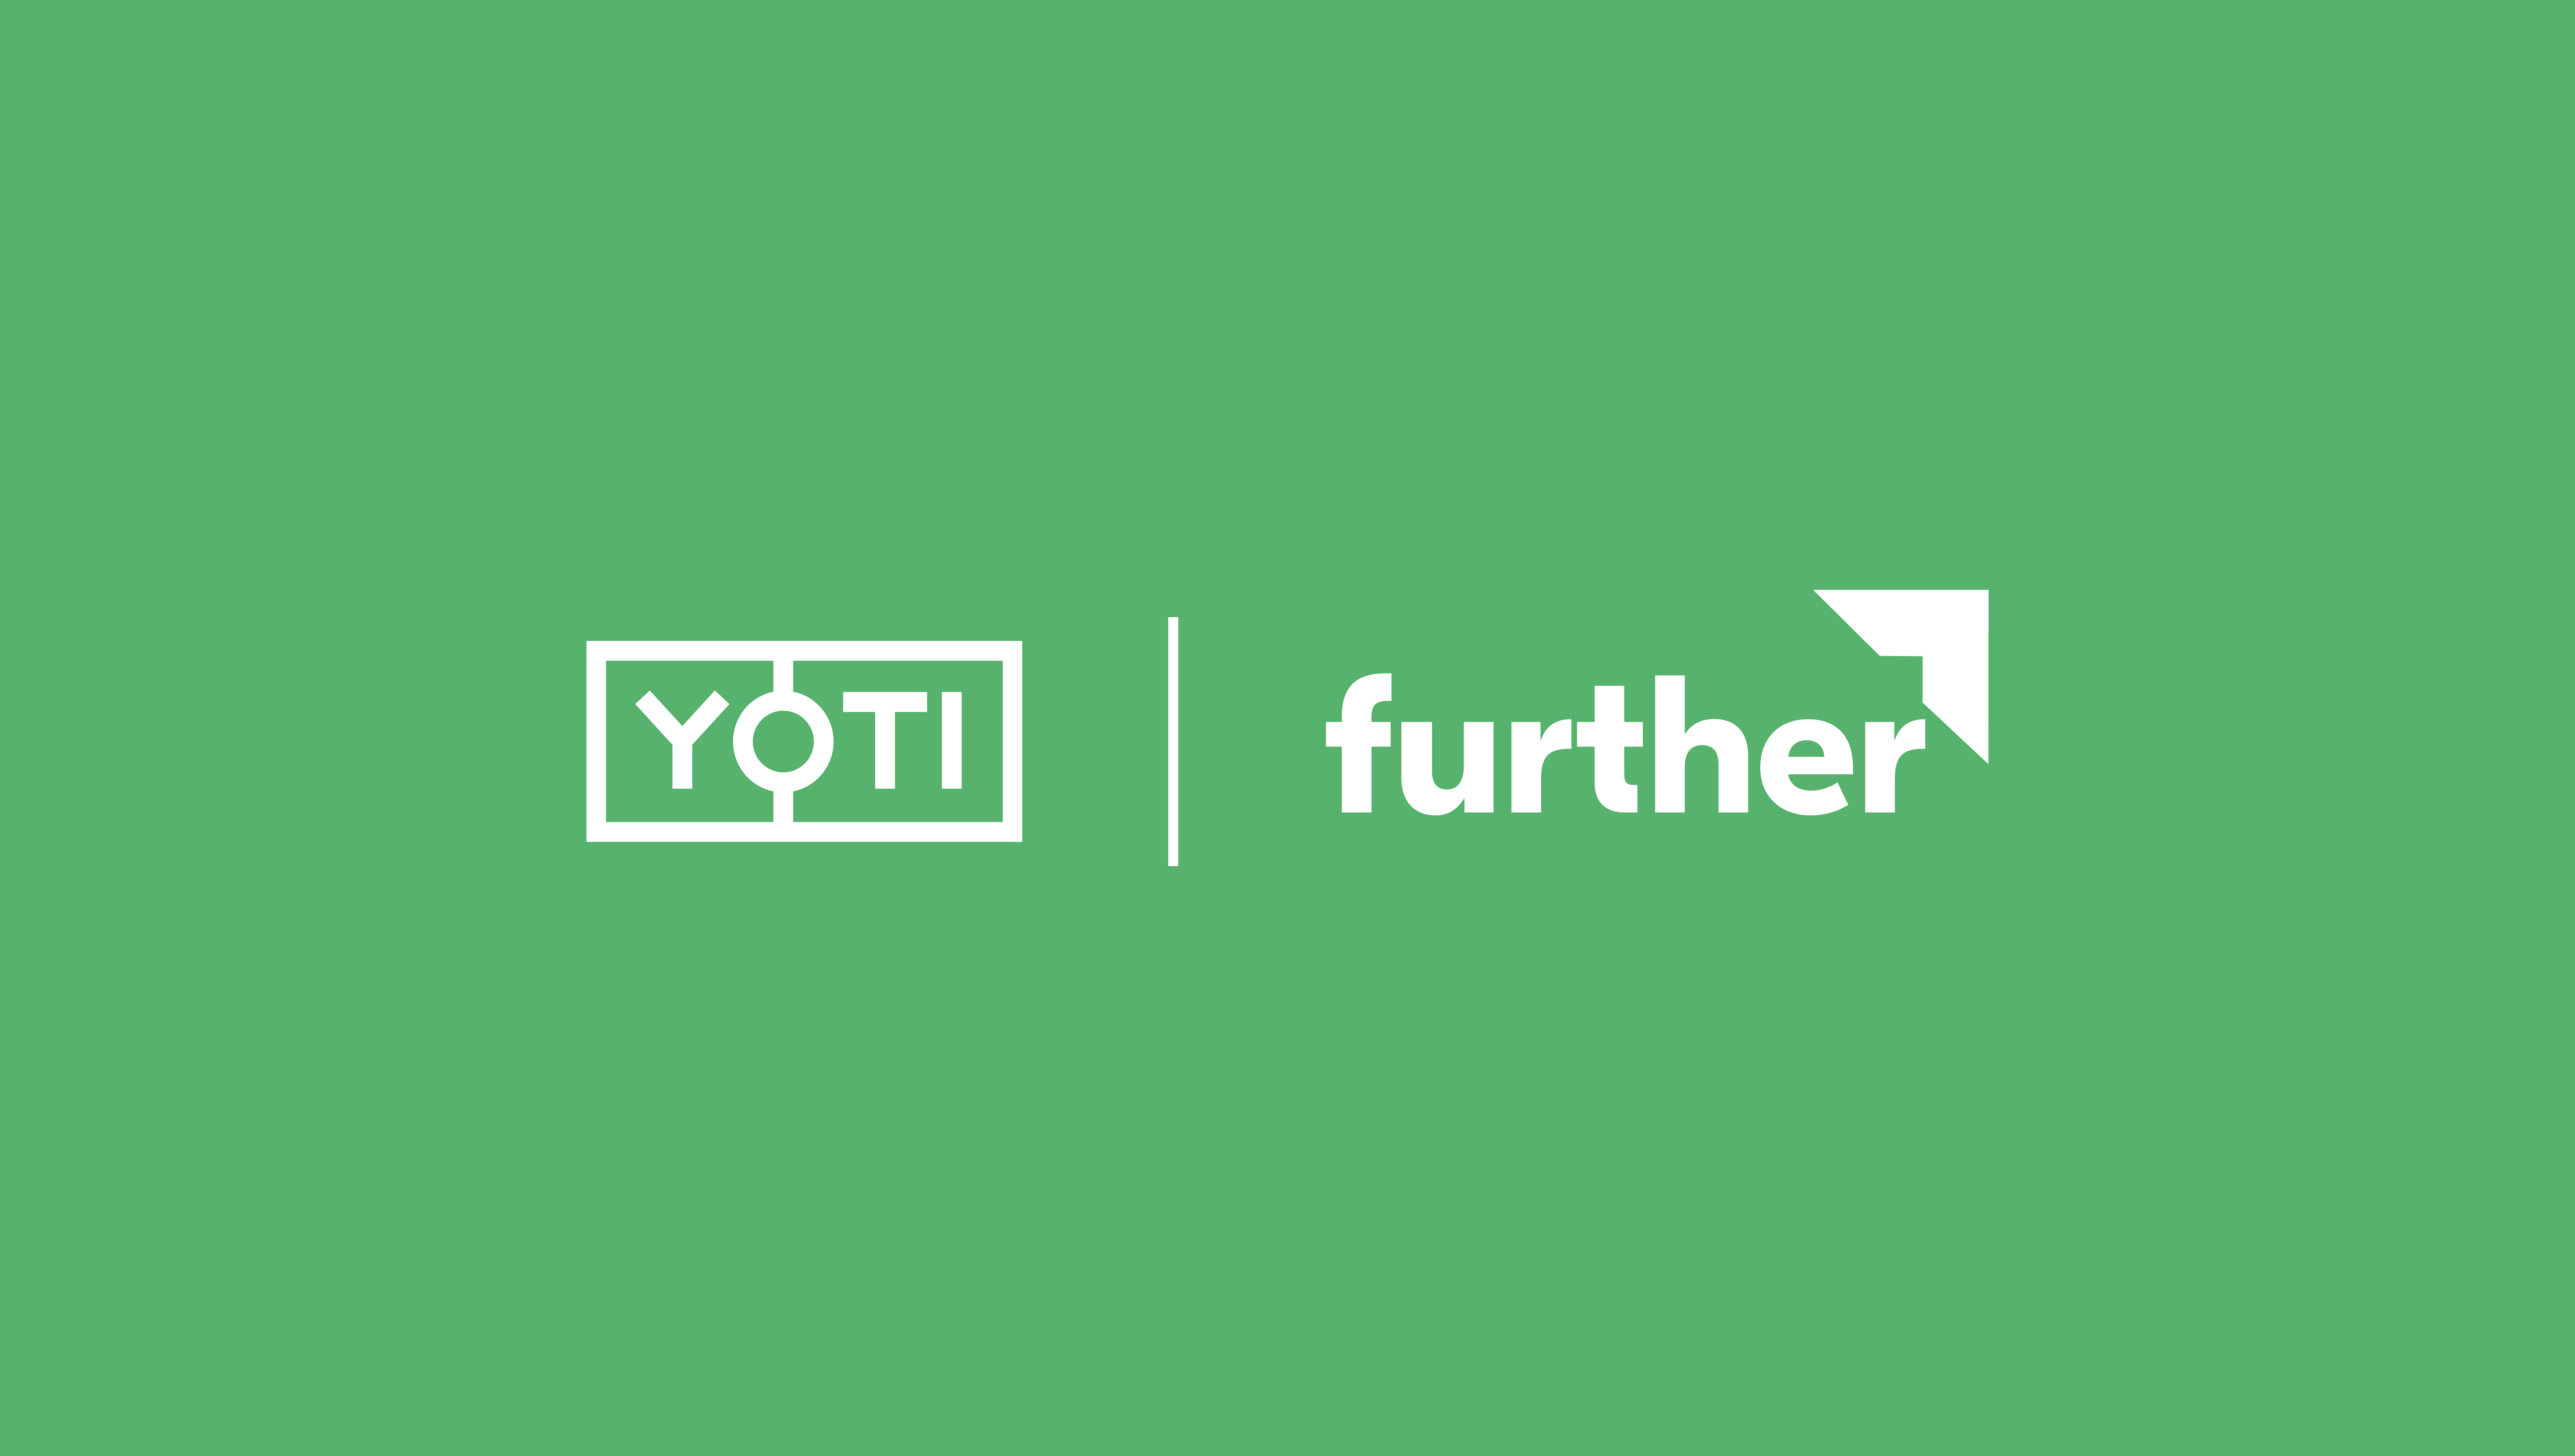 Yoti and Further logos presented together